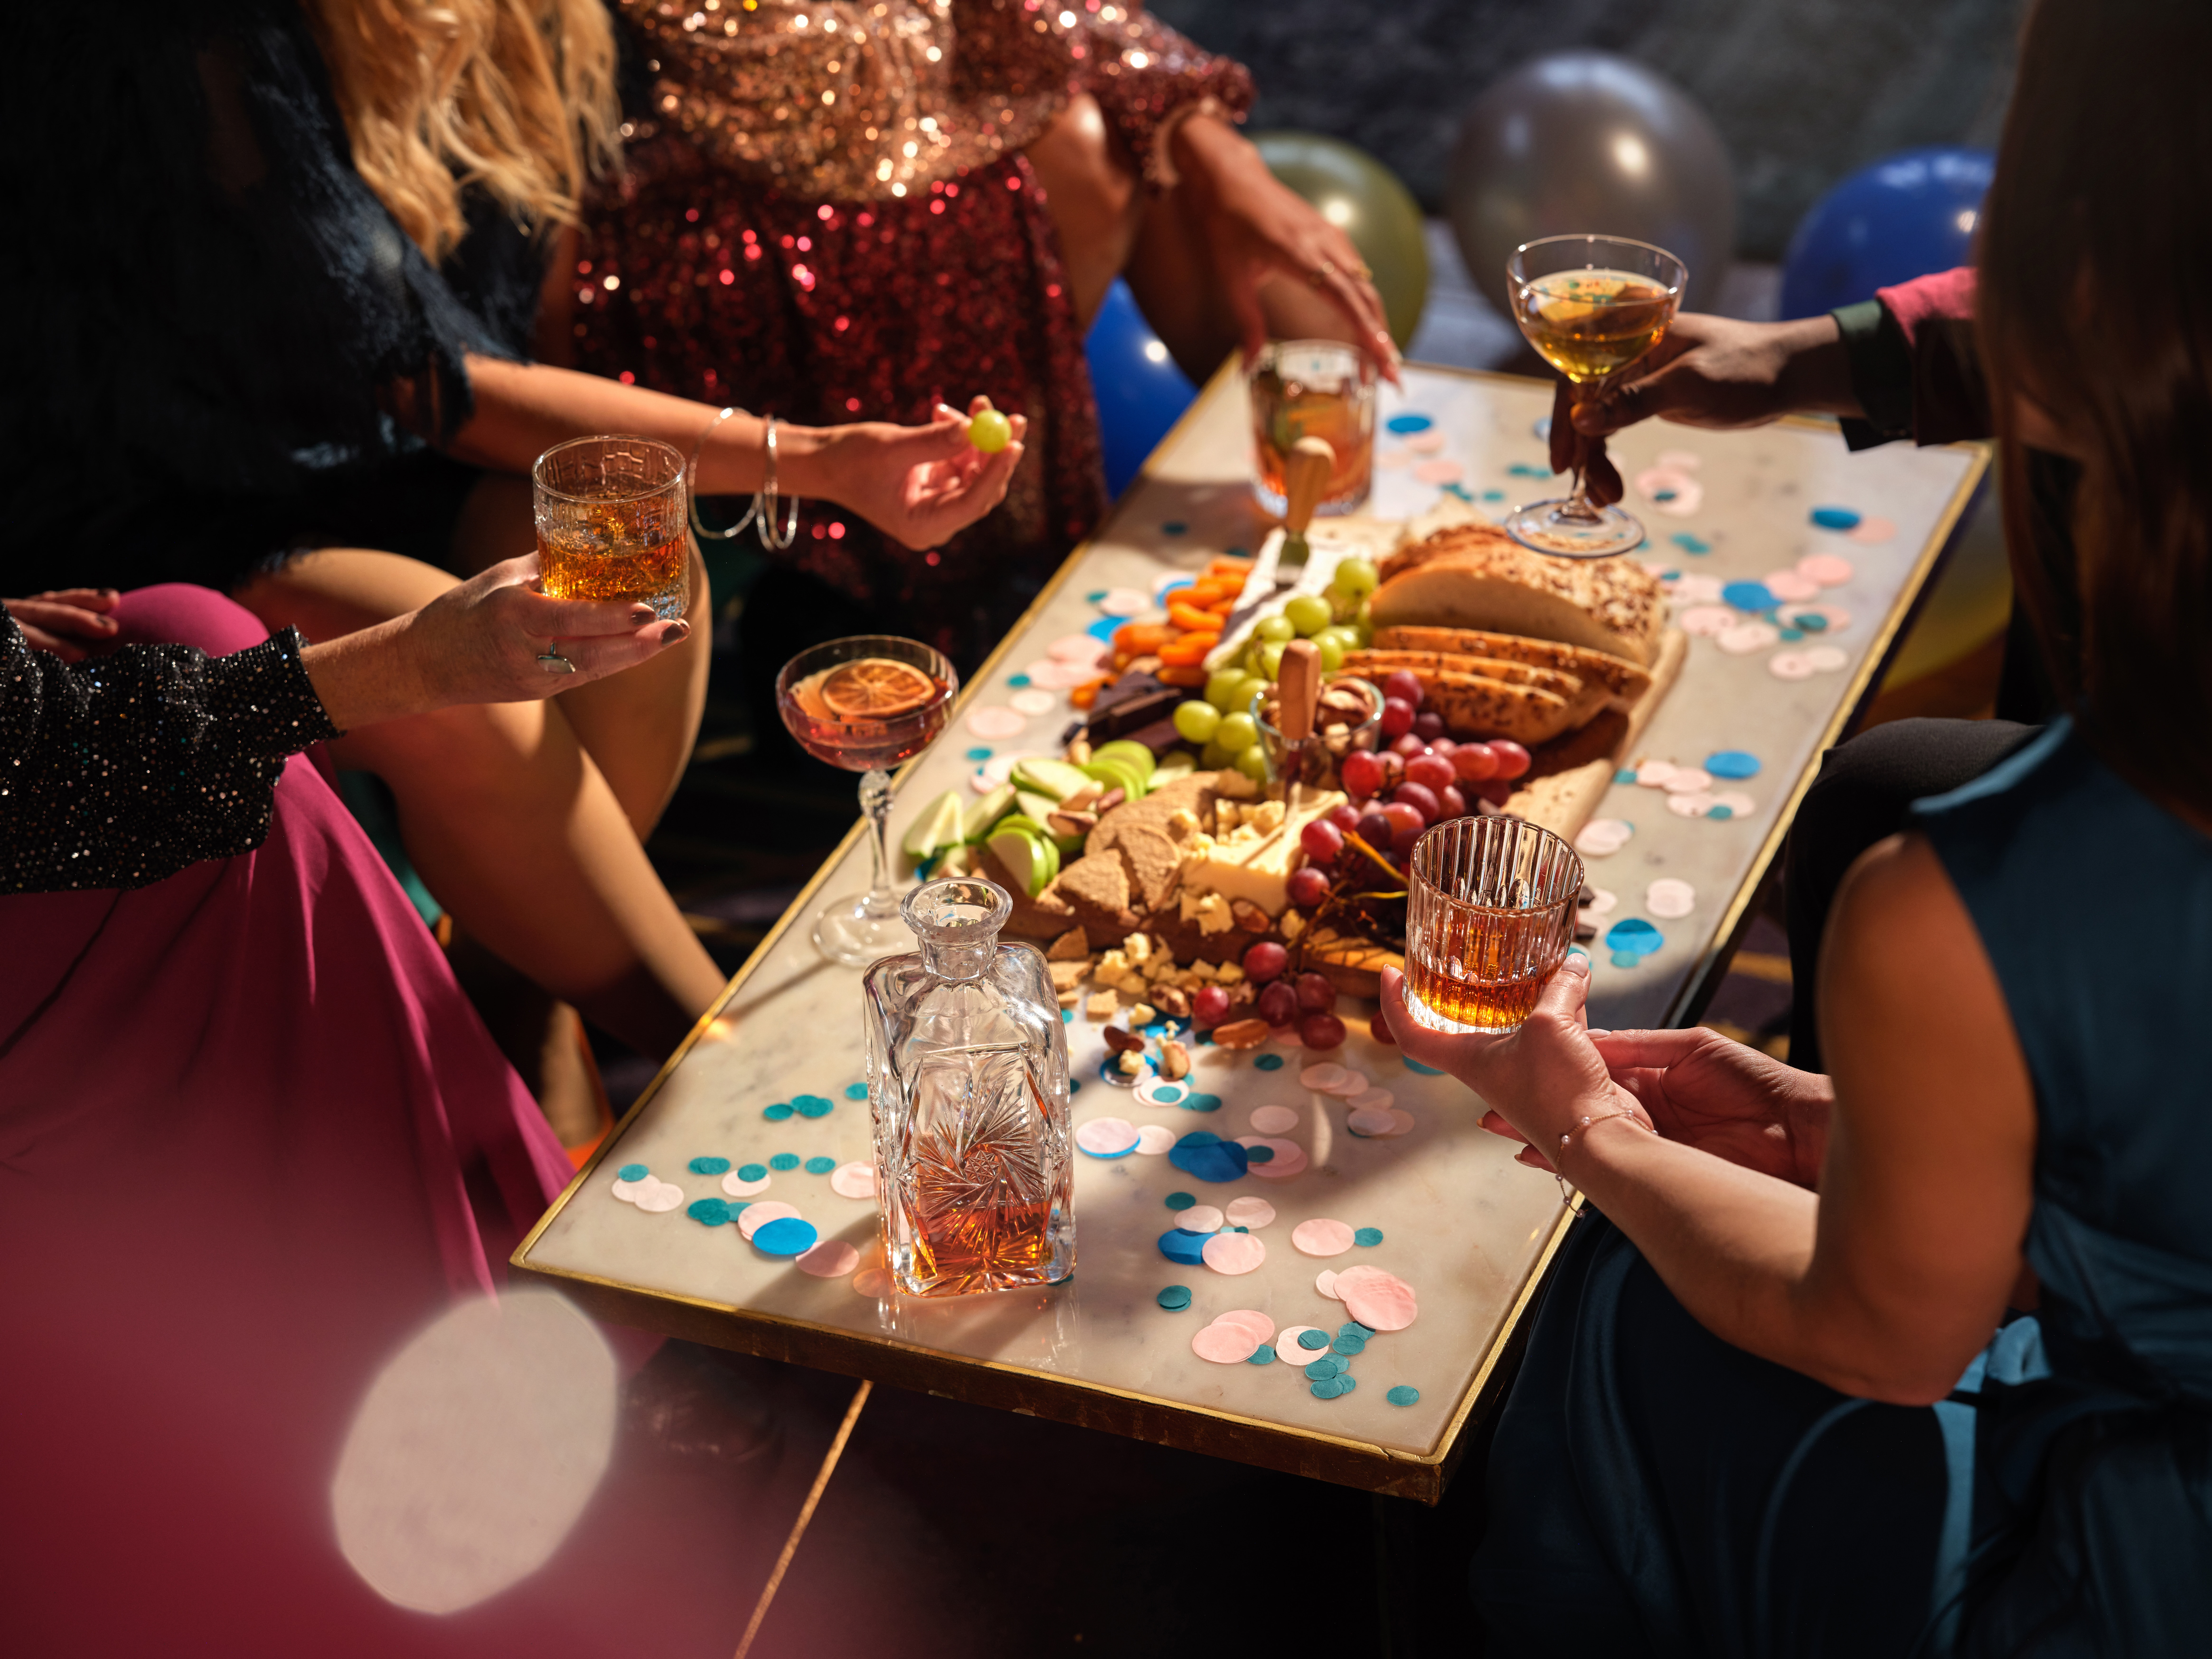 A cluster of ladies gathered around a well-laden table, partaking in goodies and spirits, commemorating New Year's Eve in North Shore.